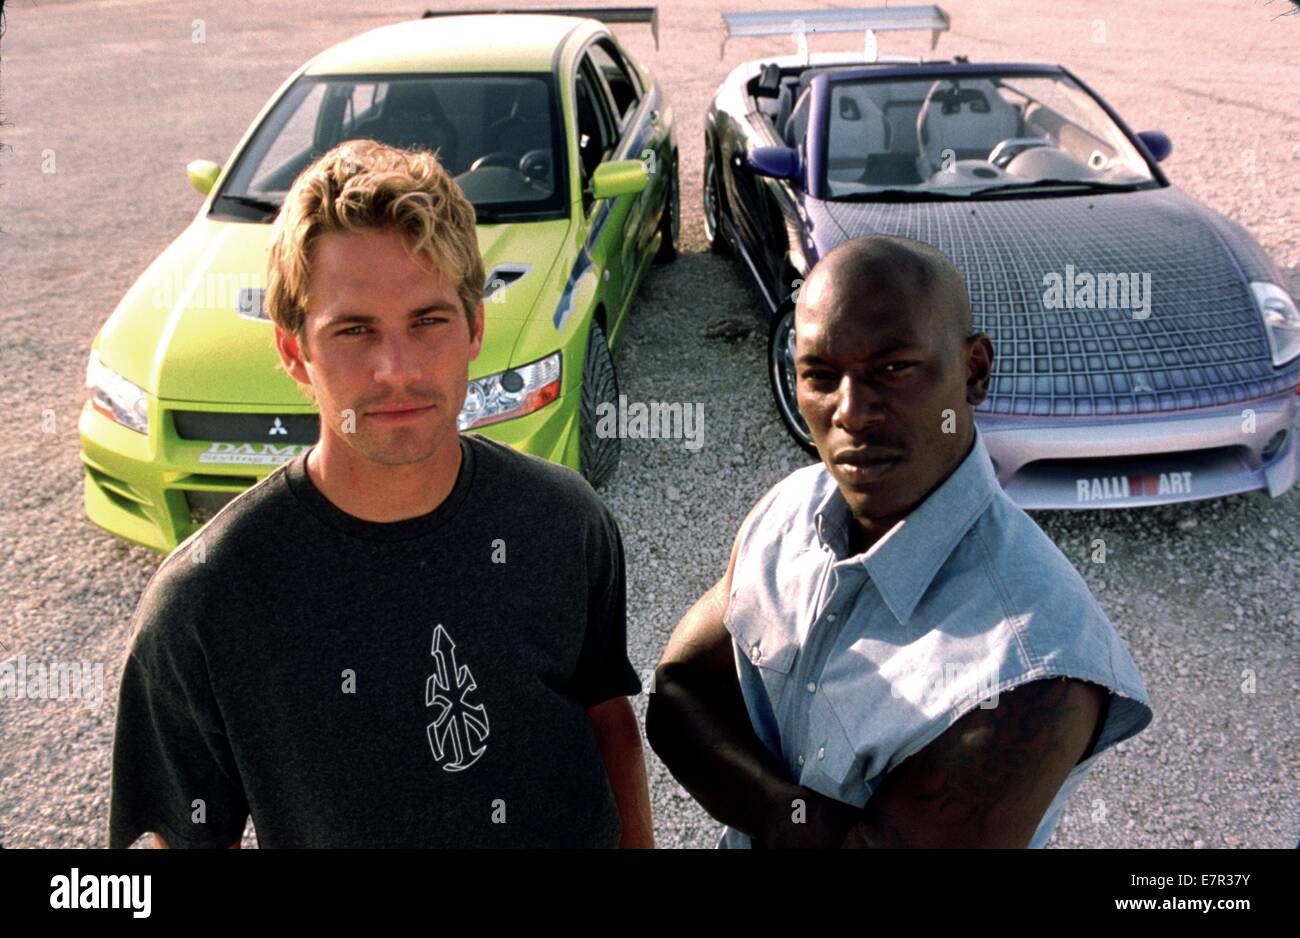 tyrese gibson cars